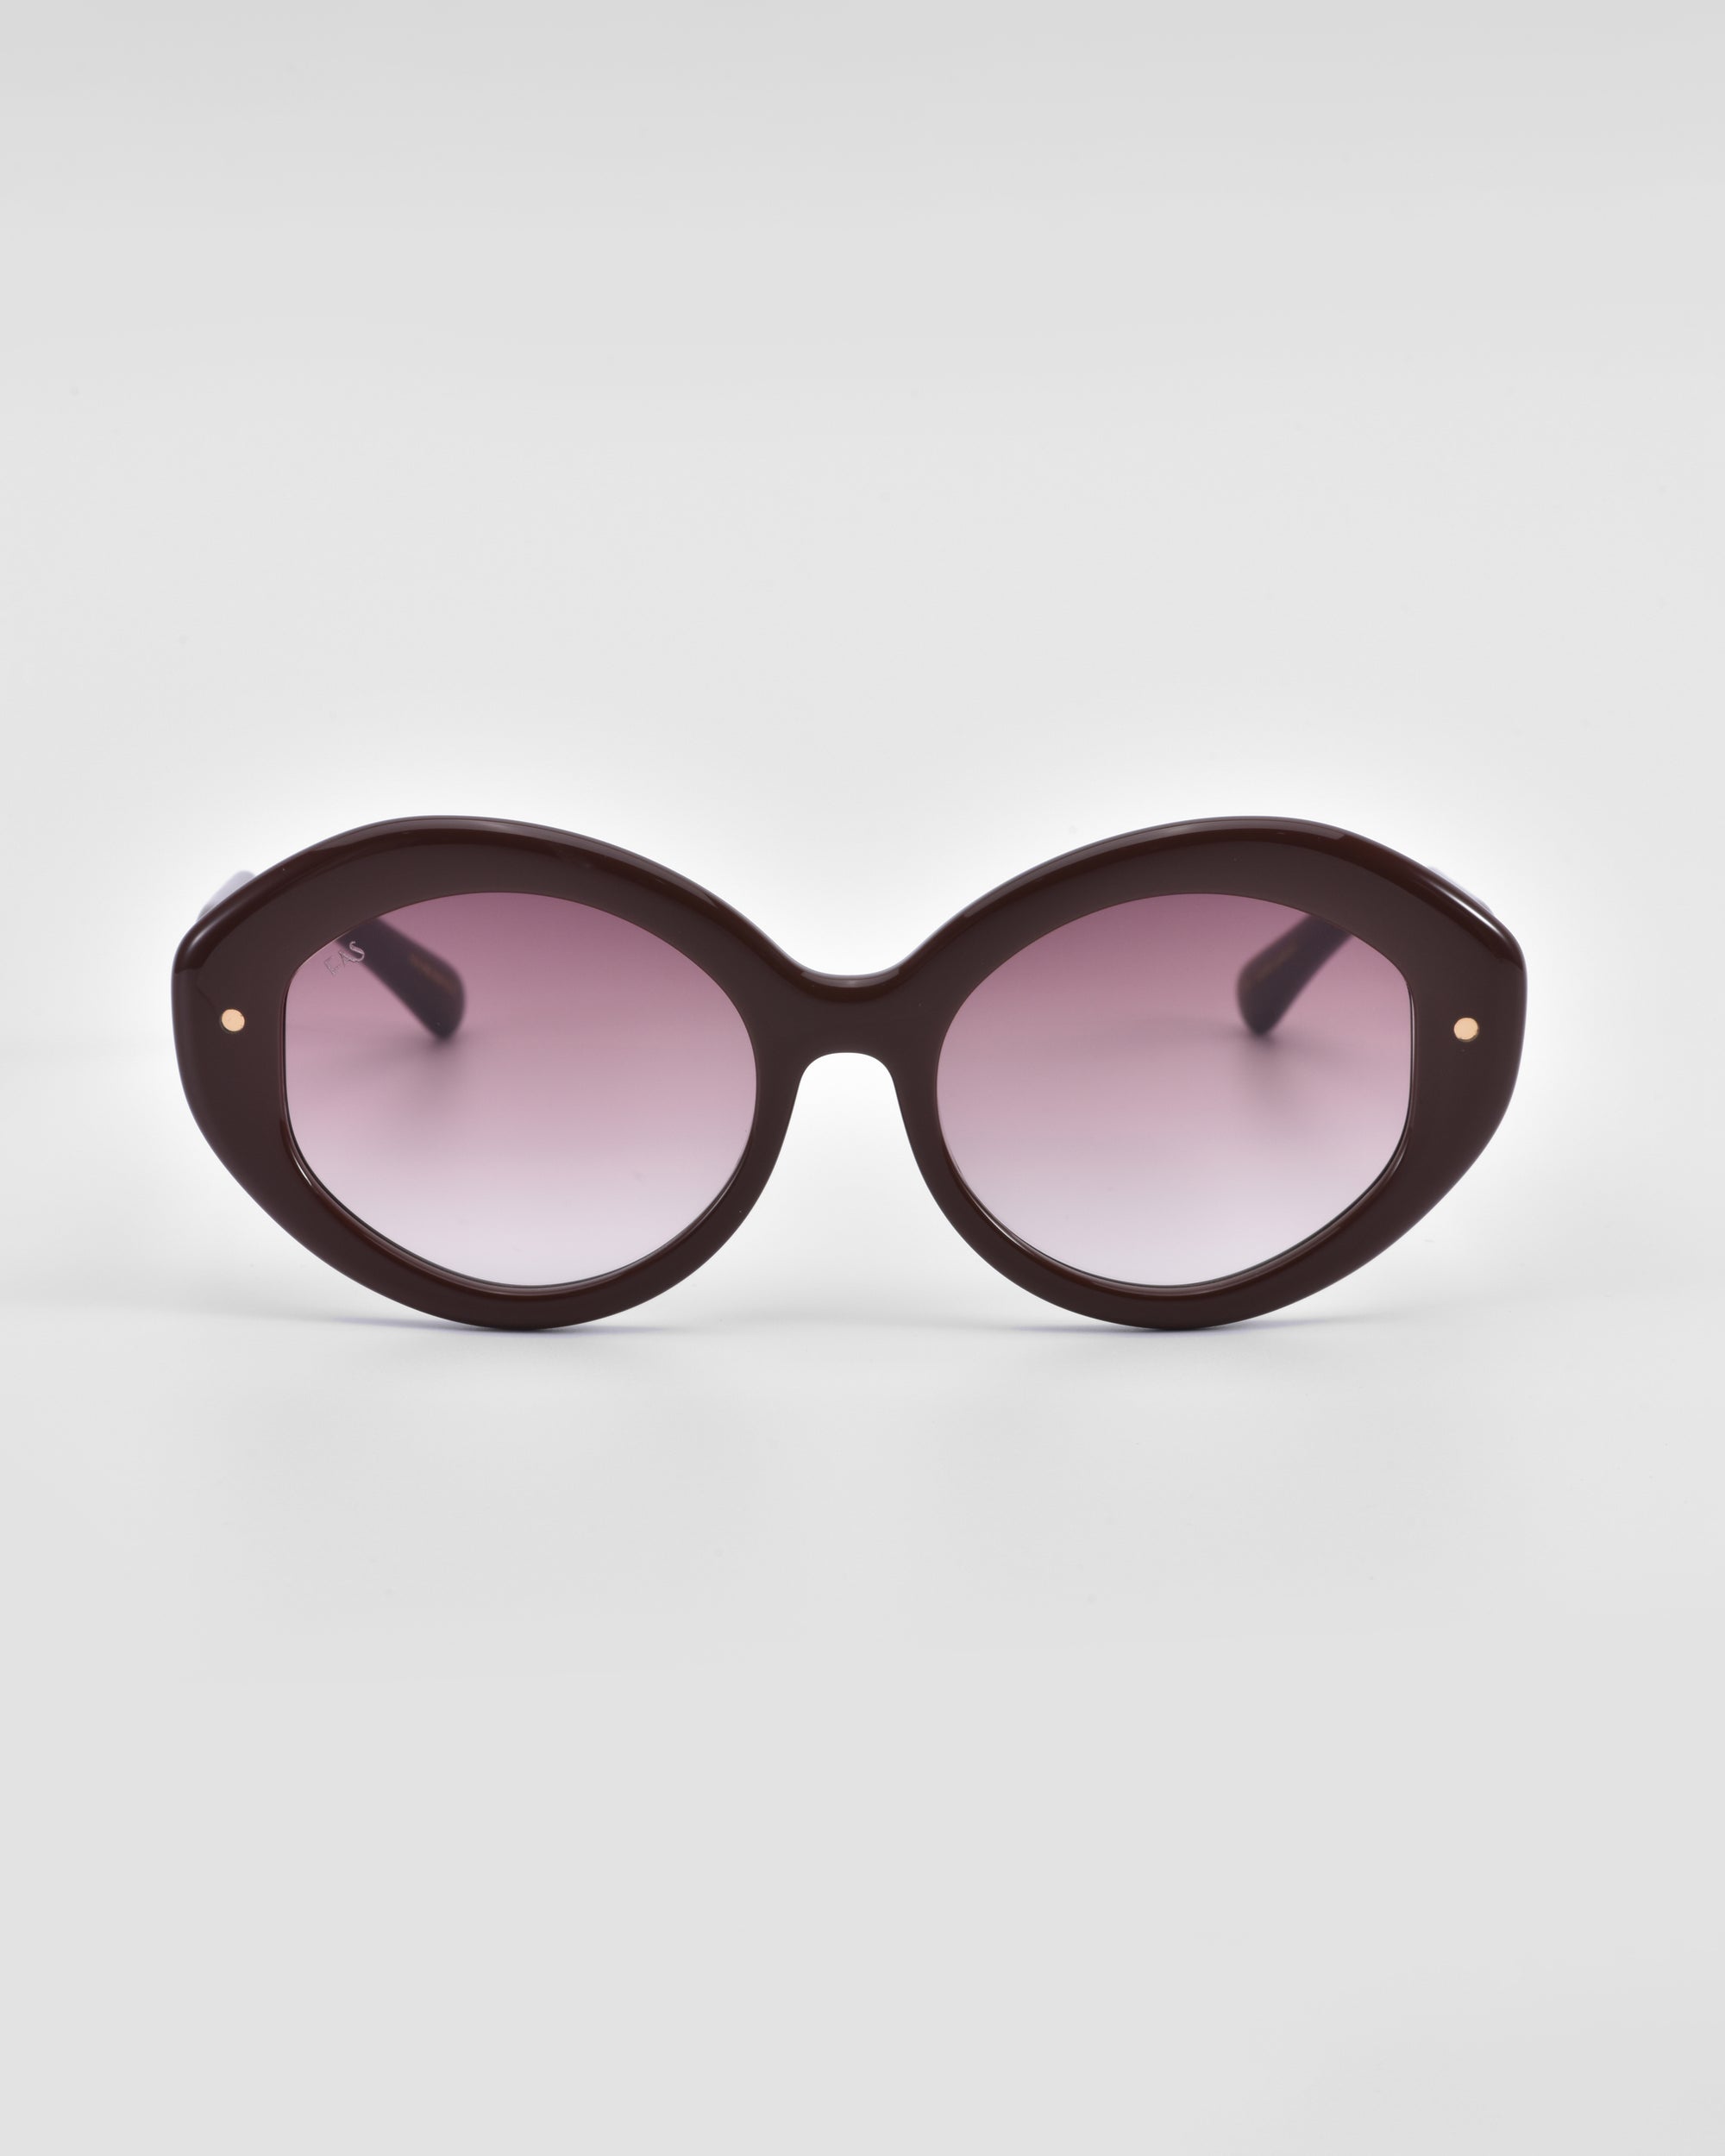 A pair of round, oversized Helios sunglasses with dark purple frames and gradient lenses transitioning from dark at the top to light at the bottom by For Art's Sake®. This piece of luxury eyewear is set against a plain white background.